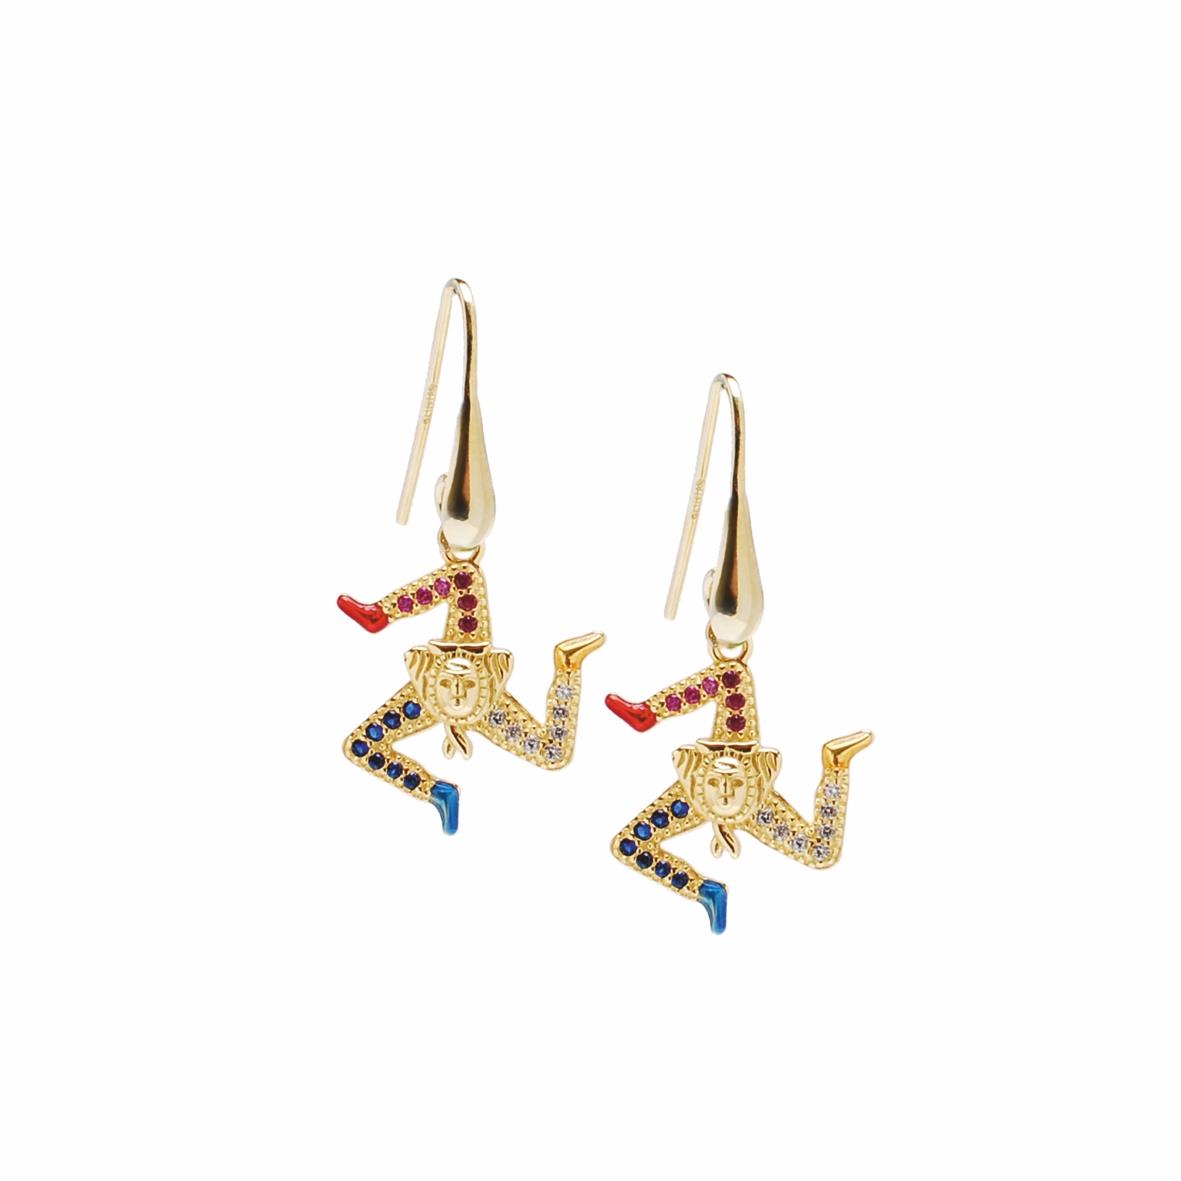 Golden silver pendant earrings with the Trinacria symbol and white, blue and red zircons - MY SICILY